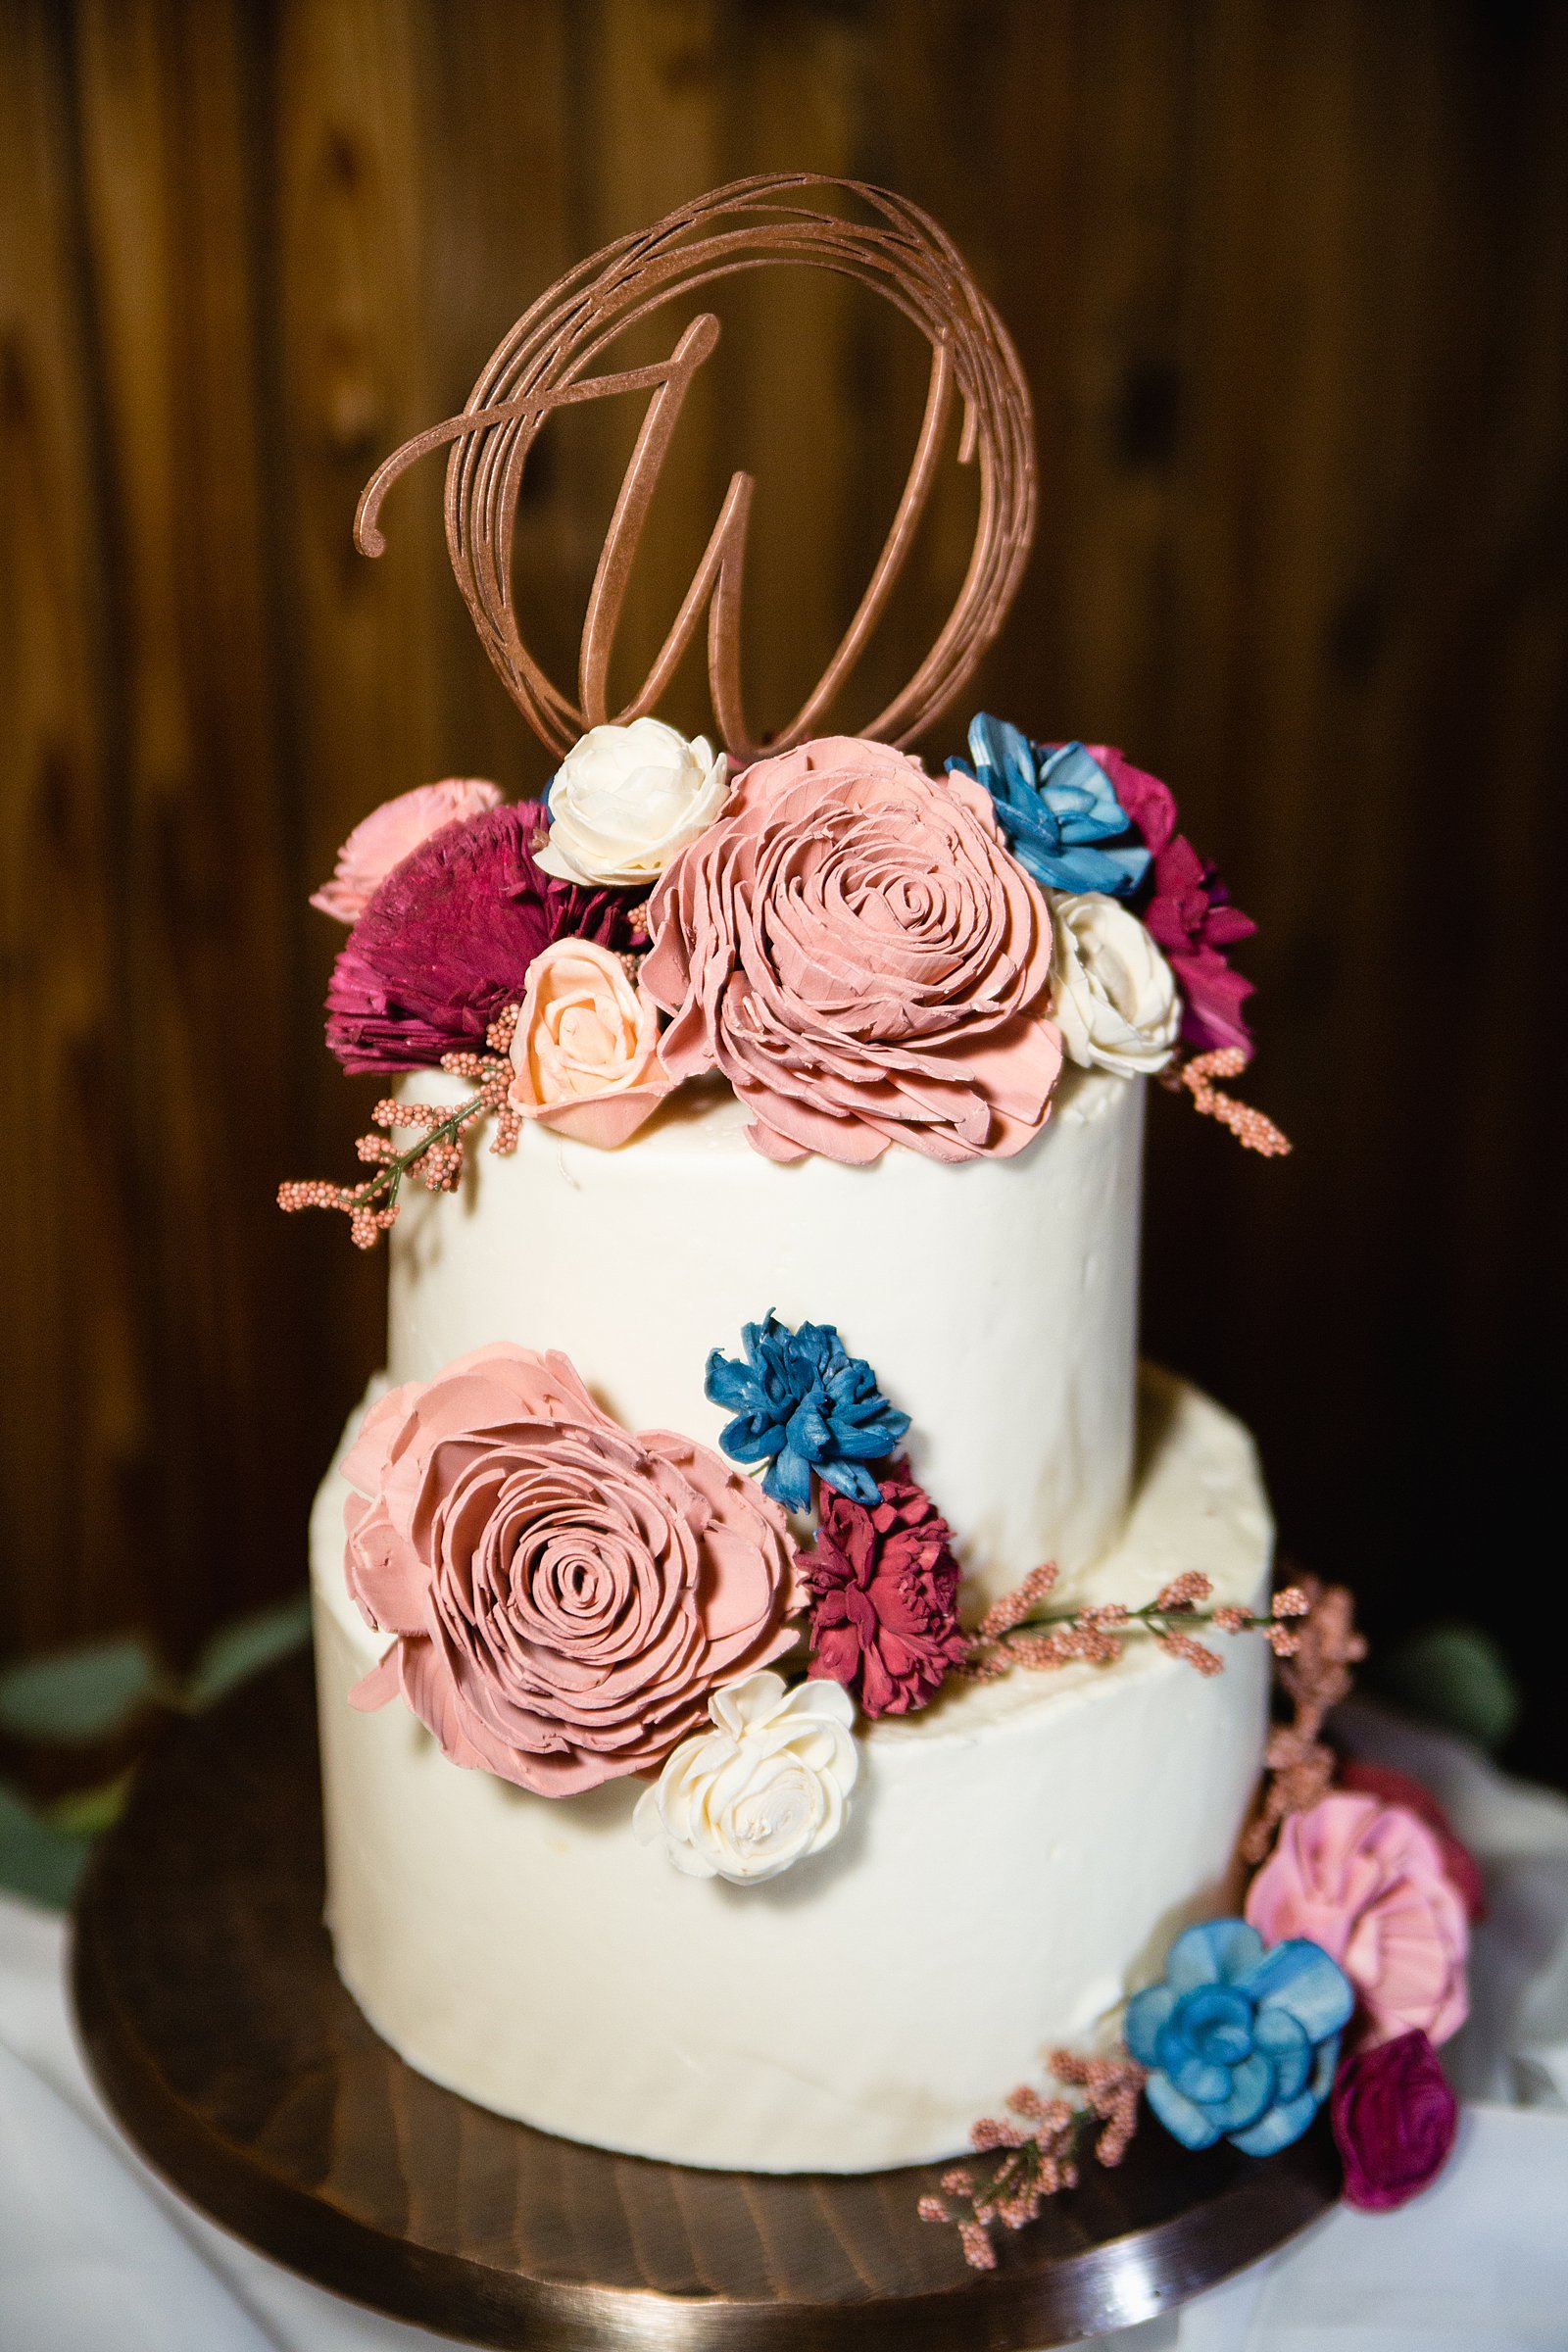 Rustic wedding cake with mauve and navy wooden flowers by Arizona wedding photographer PMA Photography.